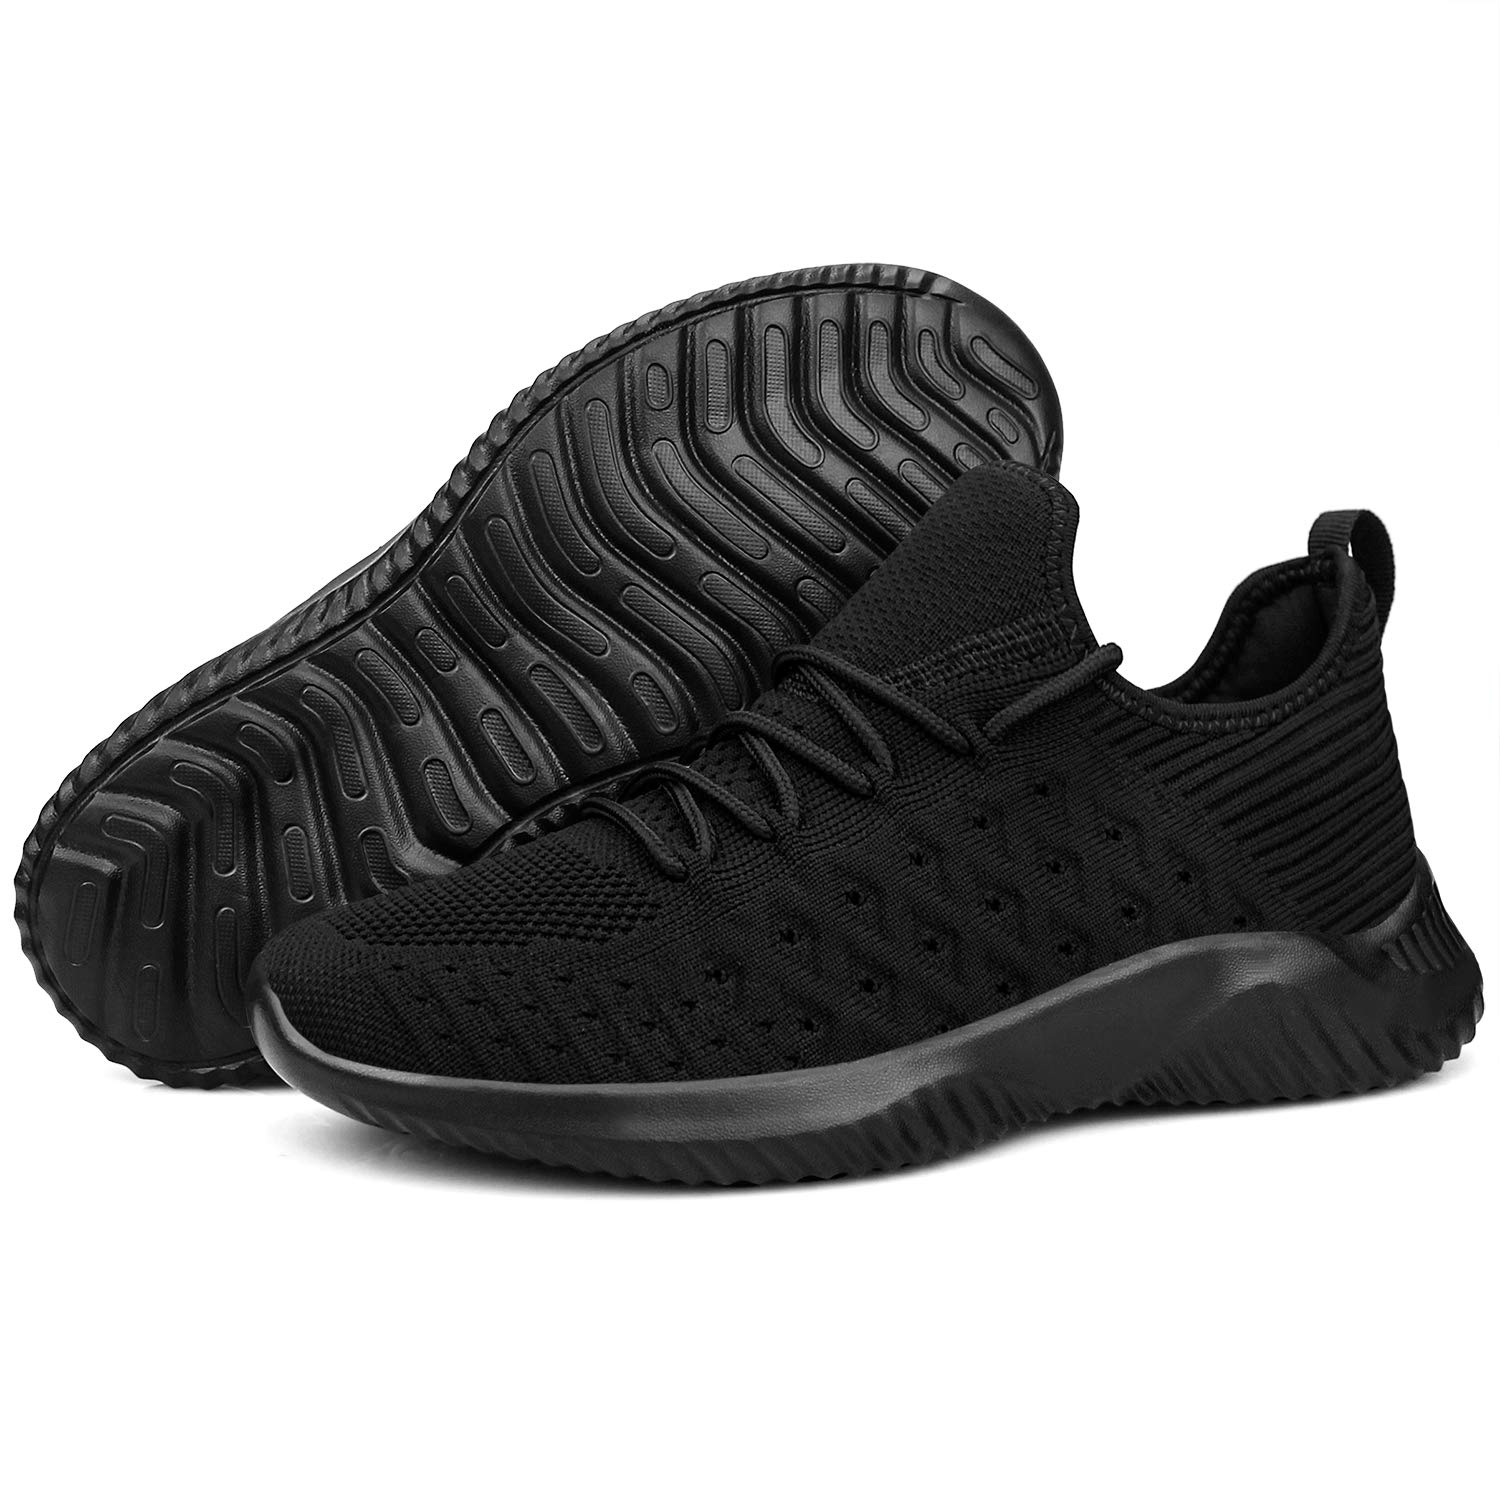 Feethit Womens Slip On Walking Shoes Non Slip Running Shoes Breathable Workout Shoes Lightweight Gym Sneakers All Black Size 11